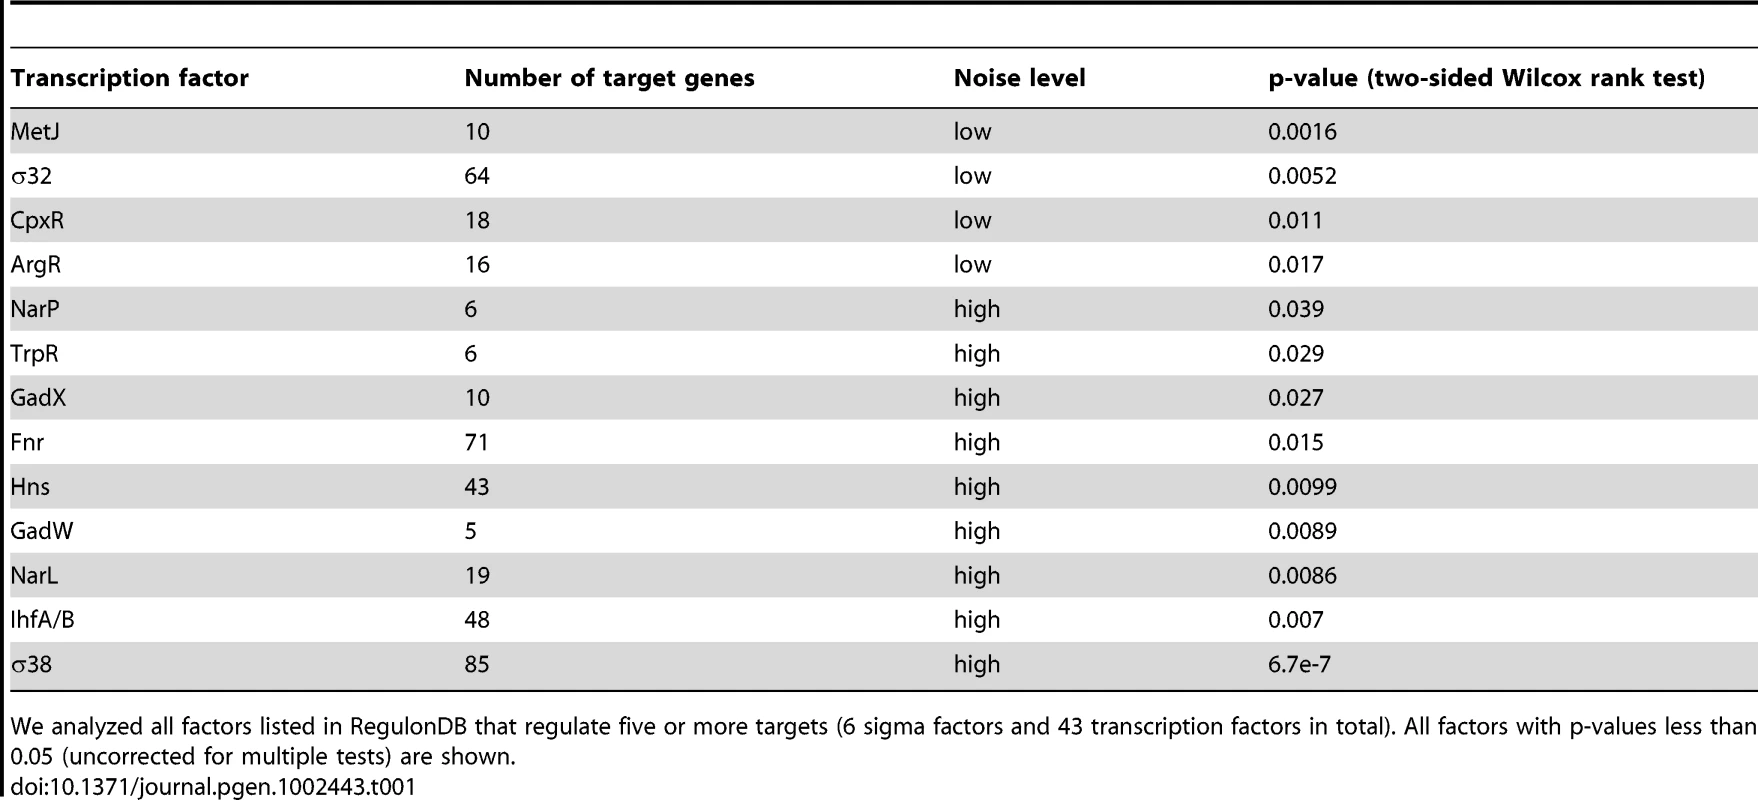 Sigma factors and transcription factors associated with genes exhibiting low or high levels of expression noise.